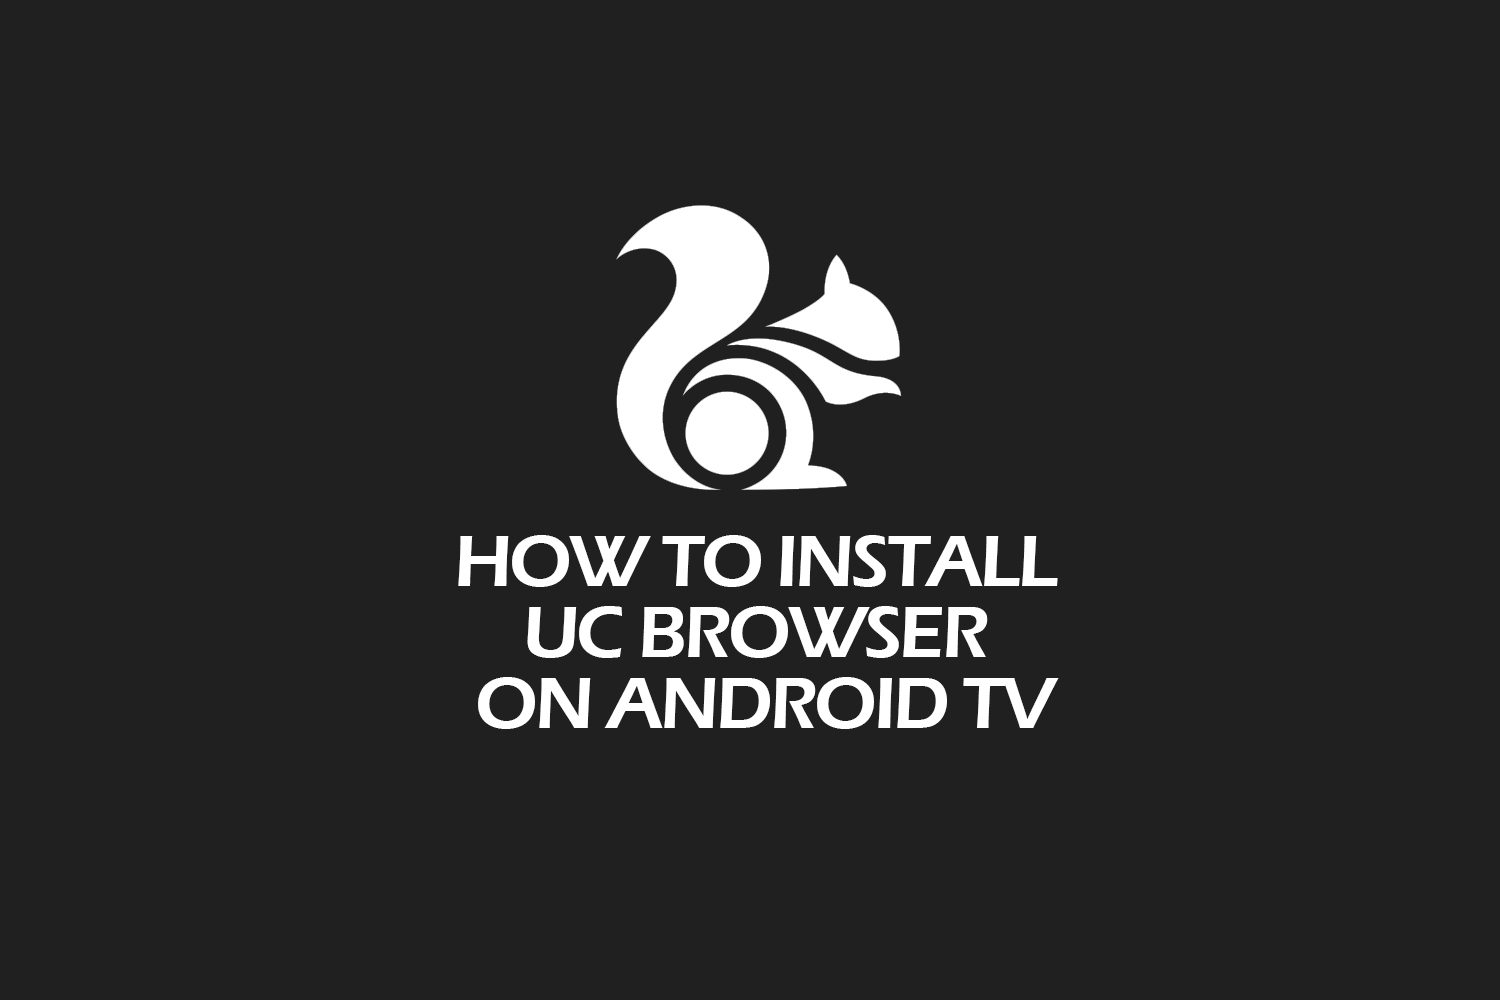 HOW TO INSTALL UC BROWSER ON ANDROID TV